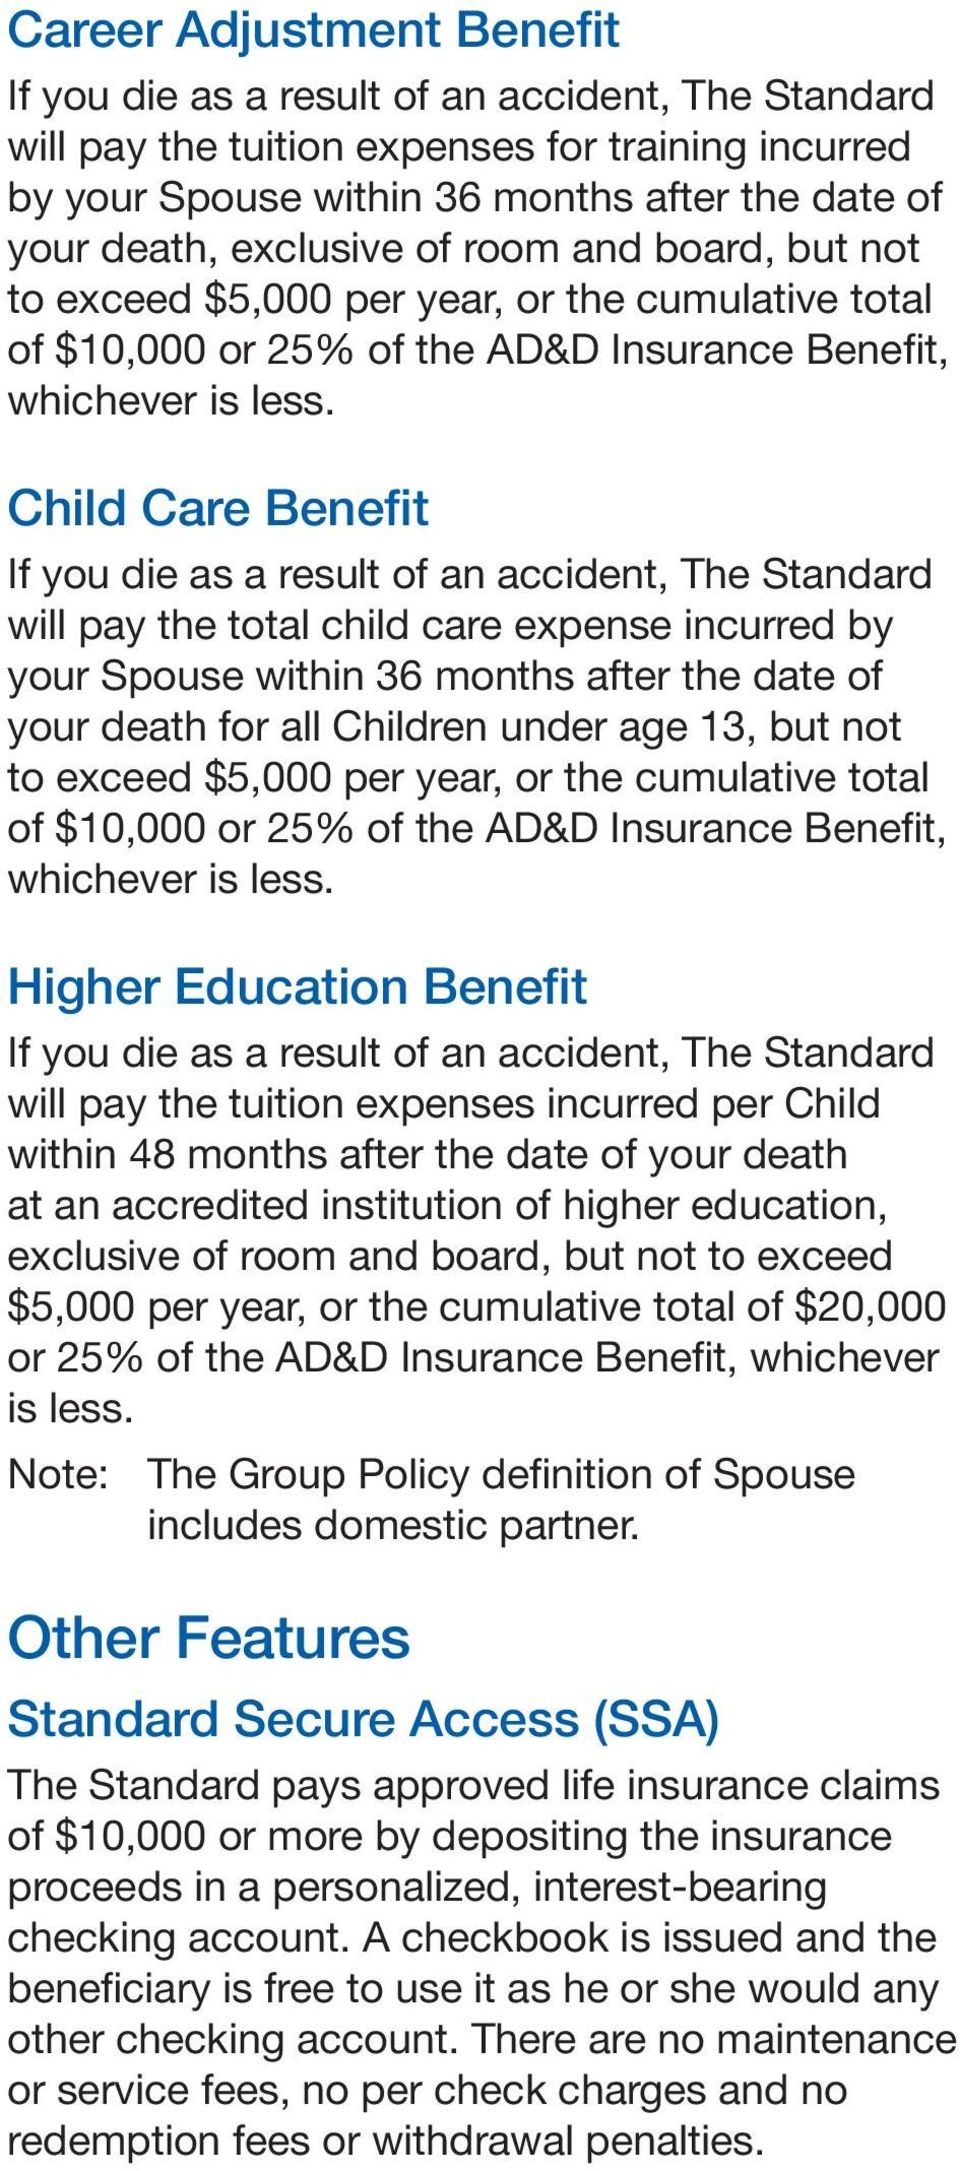 Child Care Benefit If you die as a result of an accident, The Standard will pay the total child care expense incurred by your Spouse within 36 months after the date of your death for all Children